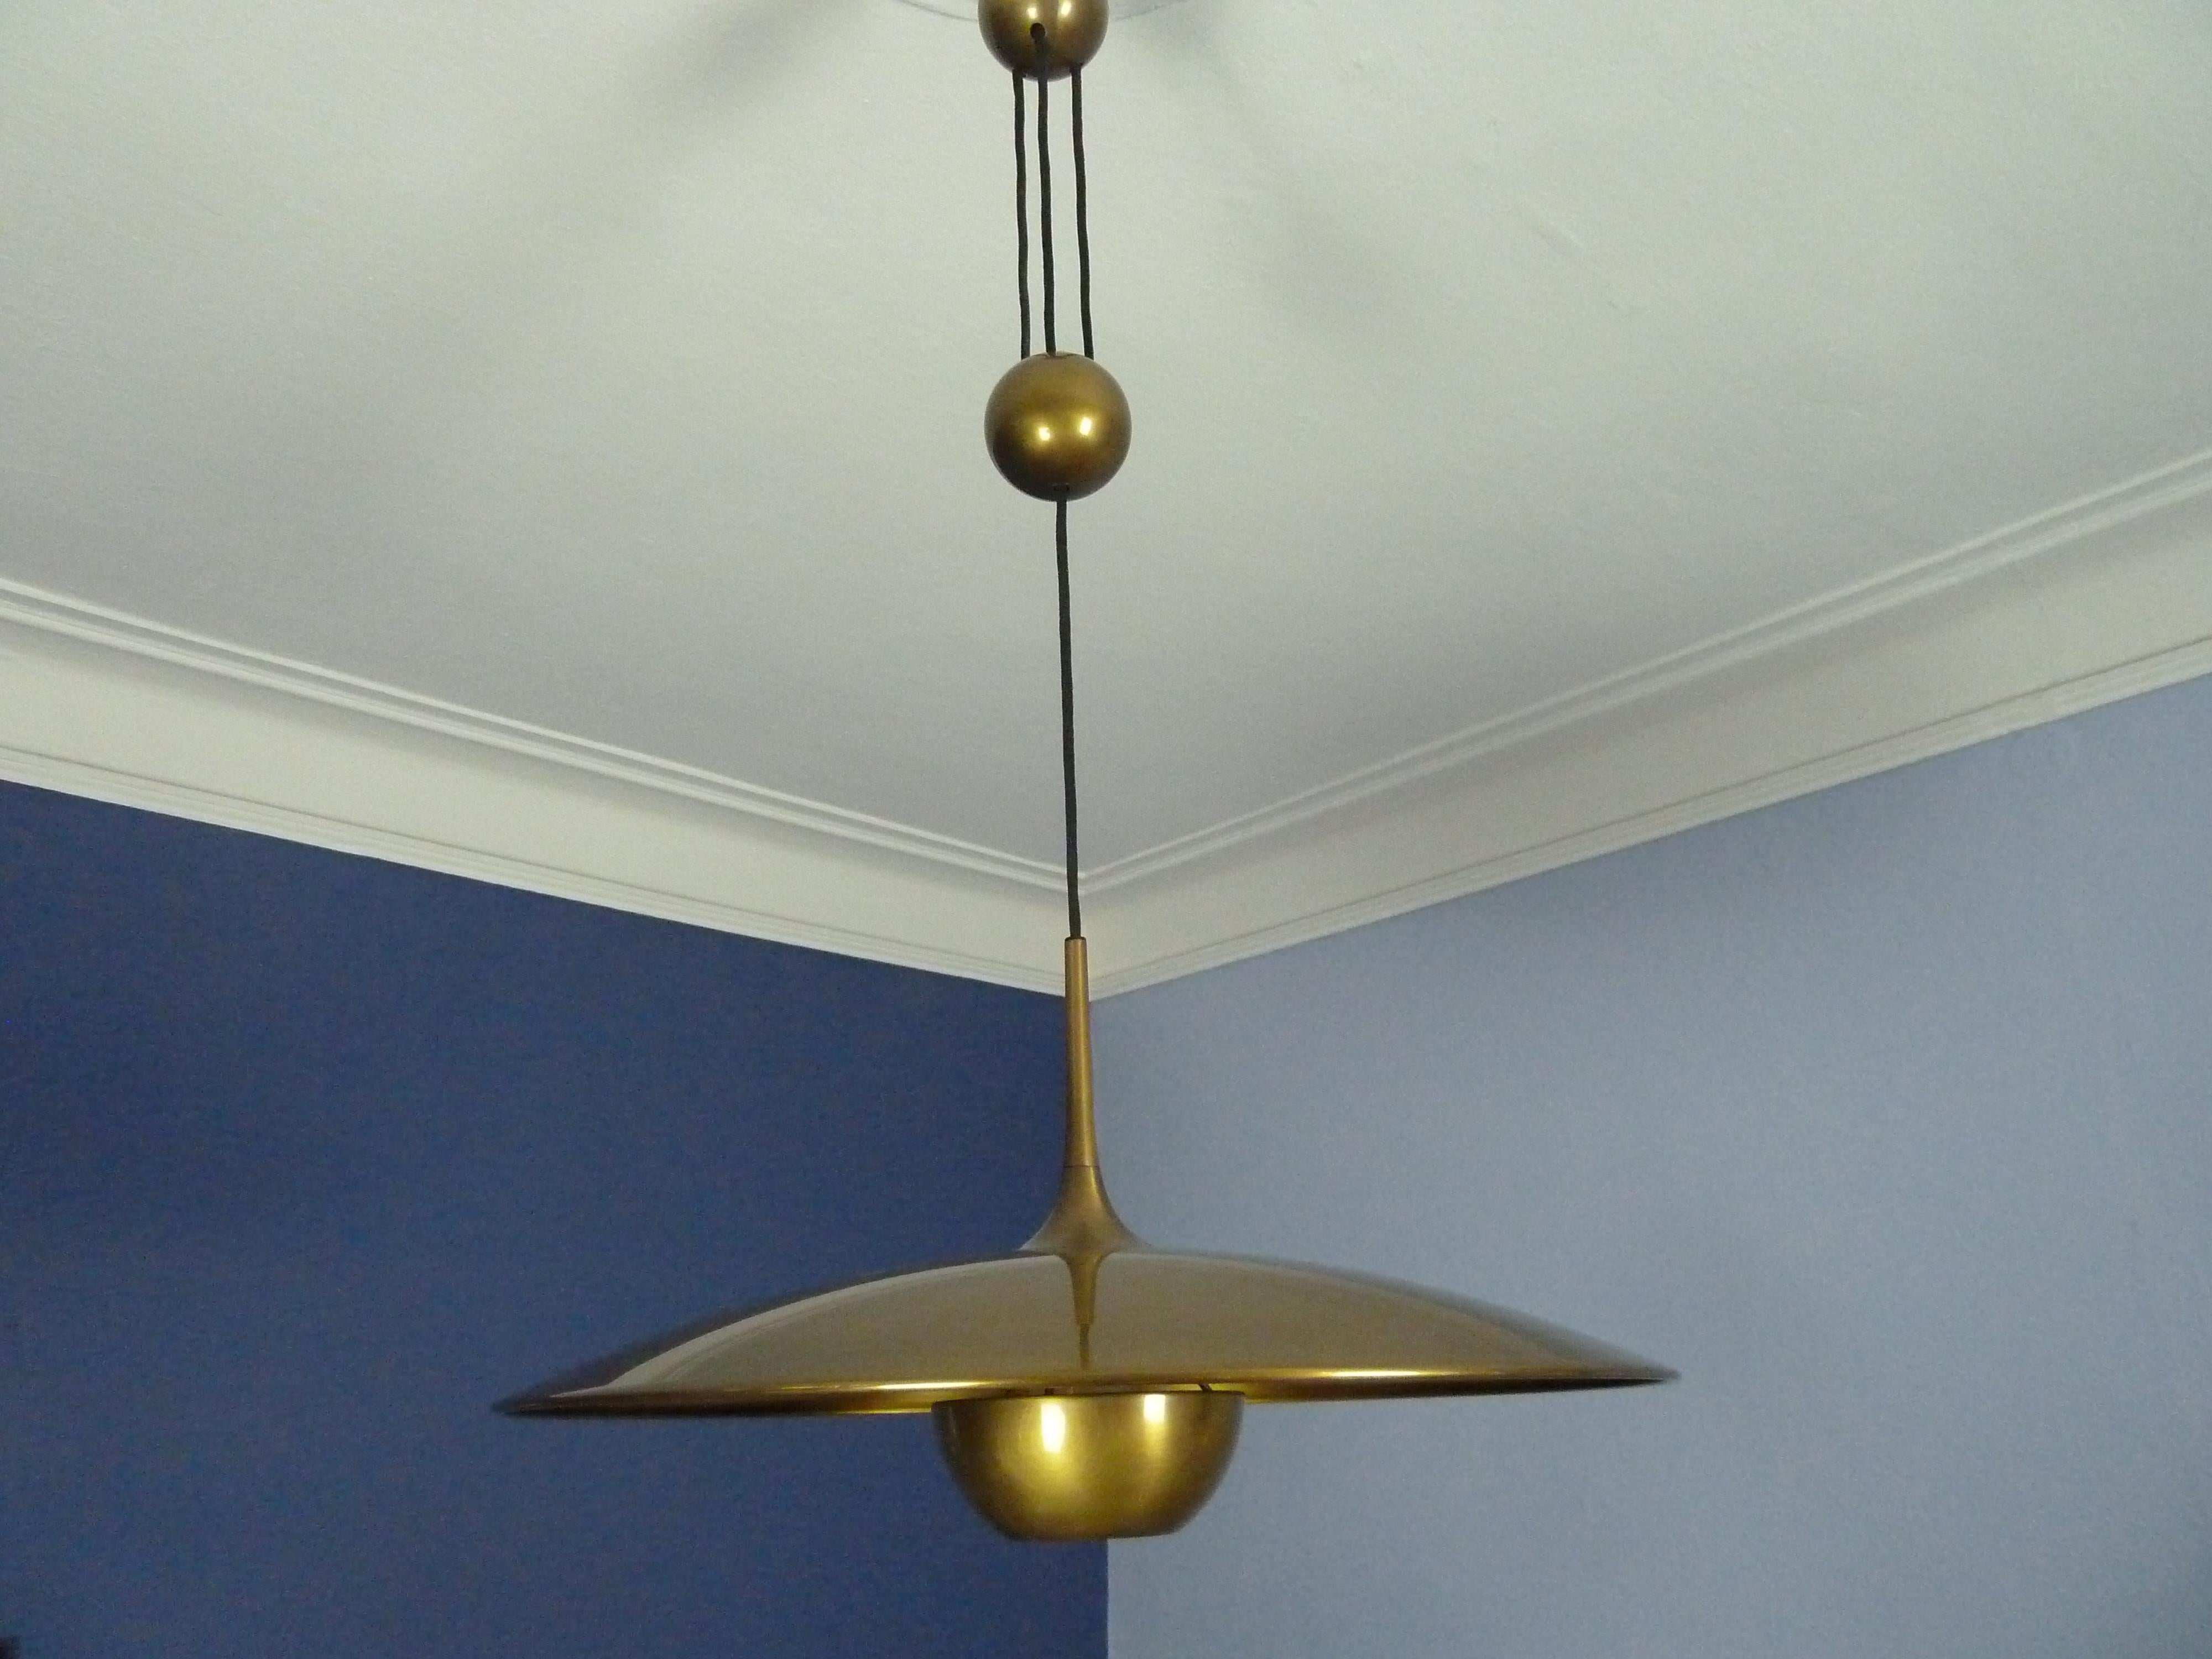 An elegant adjustable brass pendant Onos55 by Florian Schulz with a special Central Counterweight Counter Balance, adjustable from a maximum of 145cm to a minimum of 80cm.
With its brass/bronced brushed Finnish this high -quality German Product